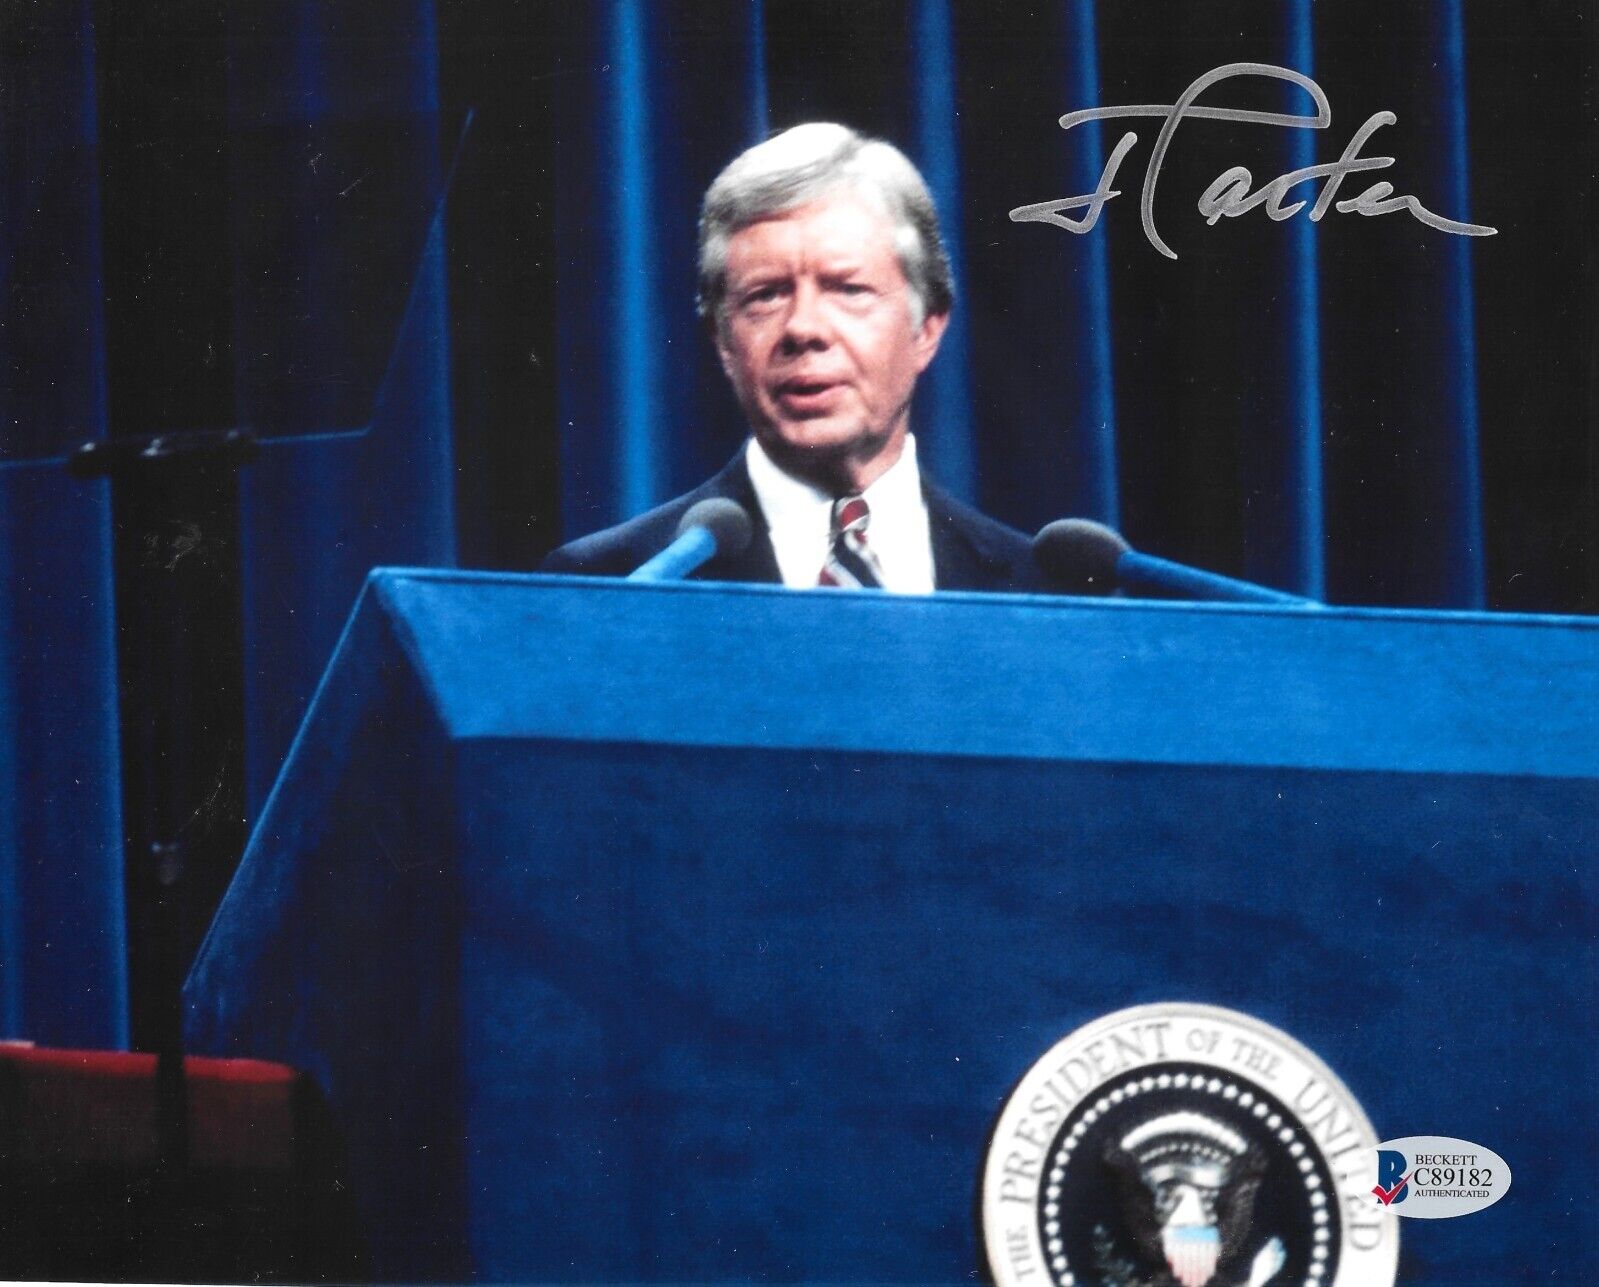 Mr. President Jimmy Carter Autographed 8x10 Photograph Signed 39th POTUS Coa 